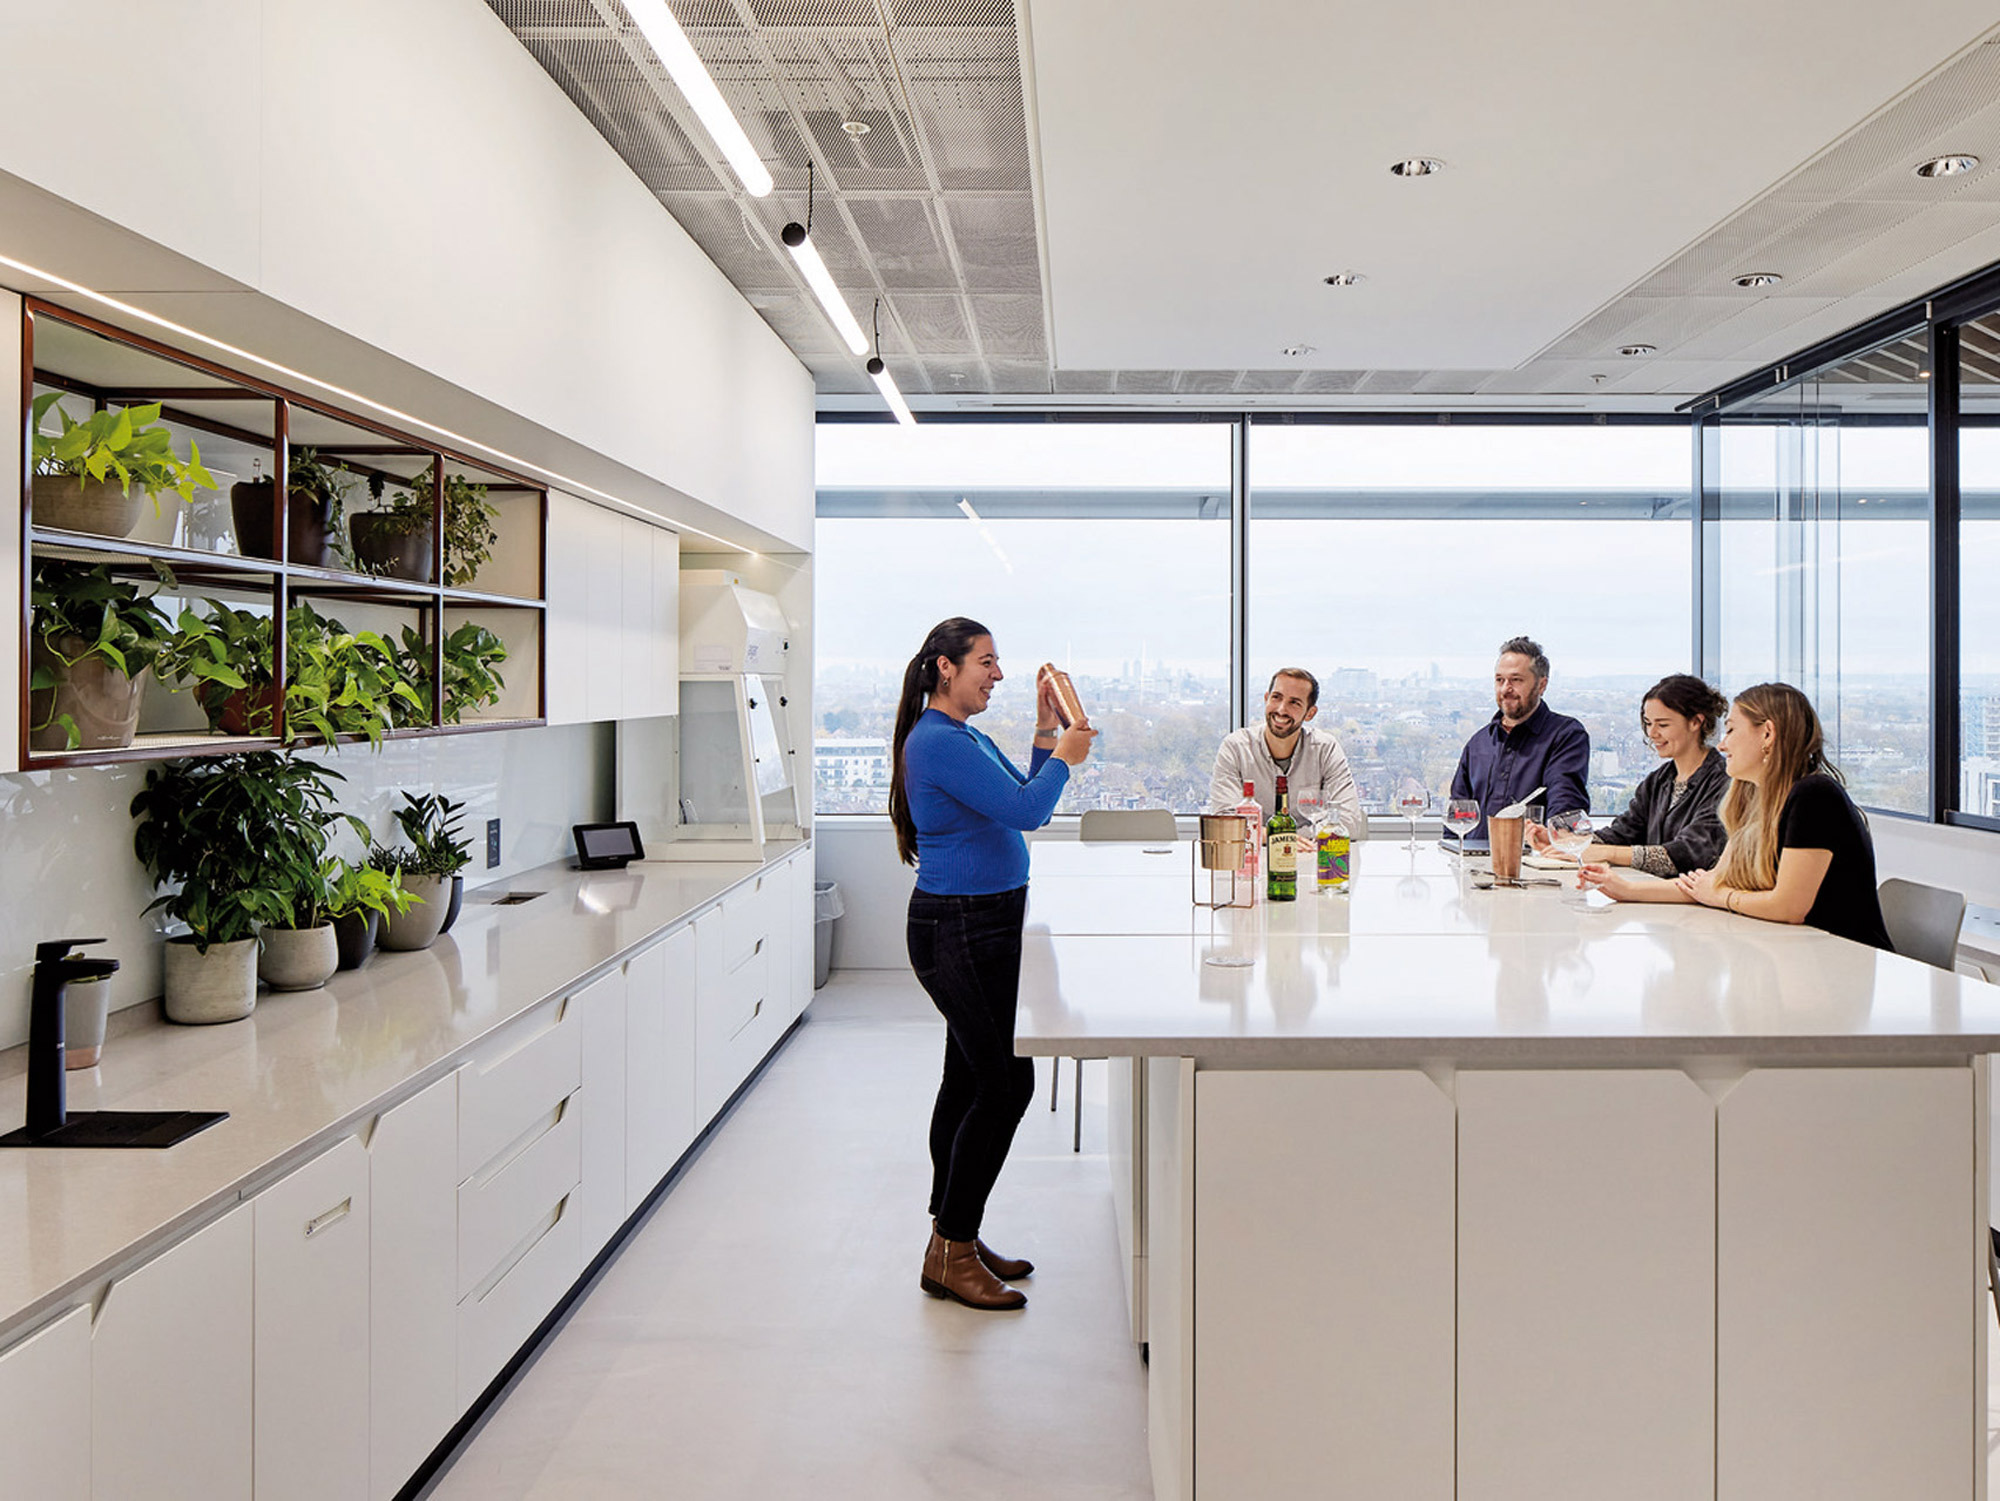 Modern office kitchen and break area with minimalist white cabinetry, expansive windows offering city views, and abundant natural light. Green plants add a vibrant touch to the clean, functional design. A group of professionals engage in a casual meeting around the central island.